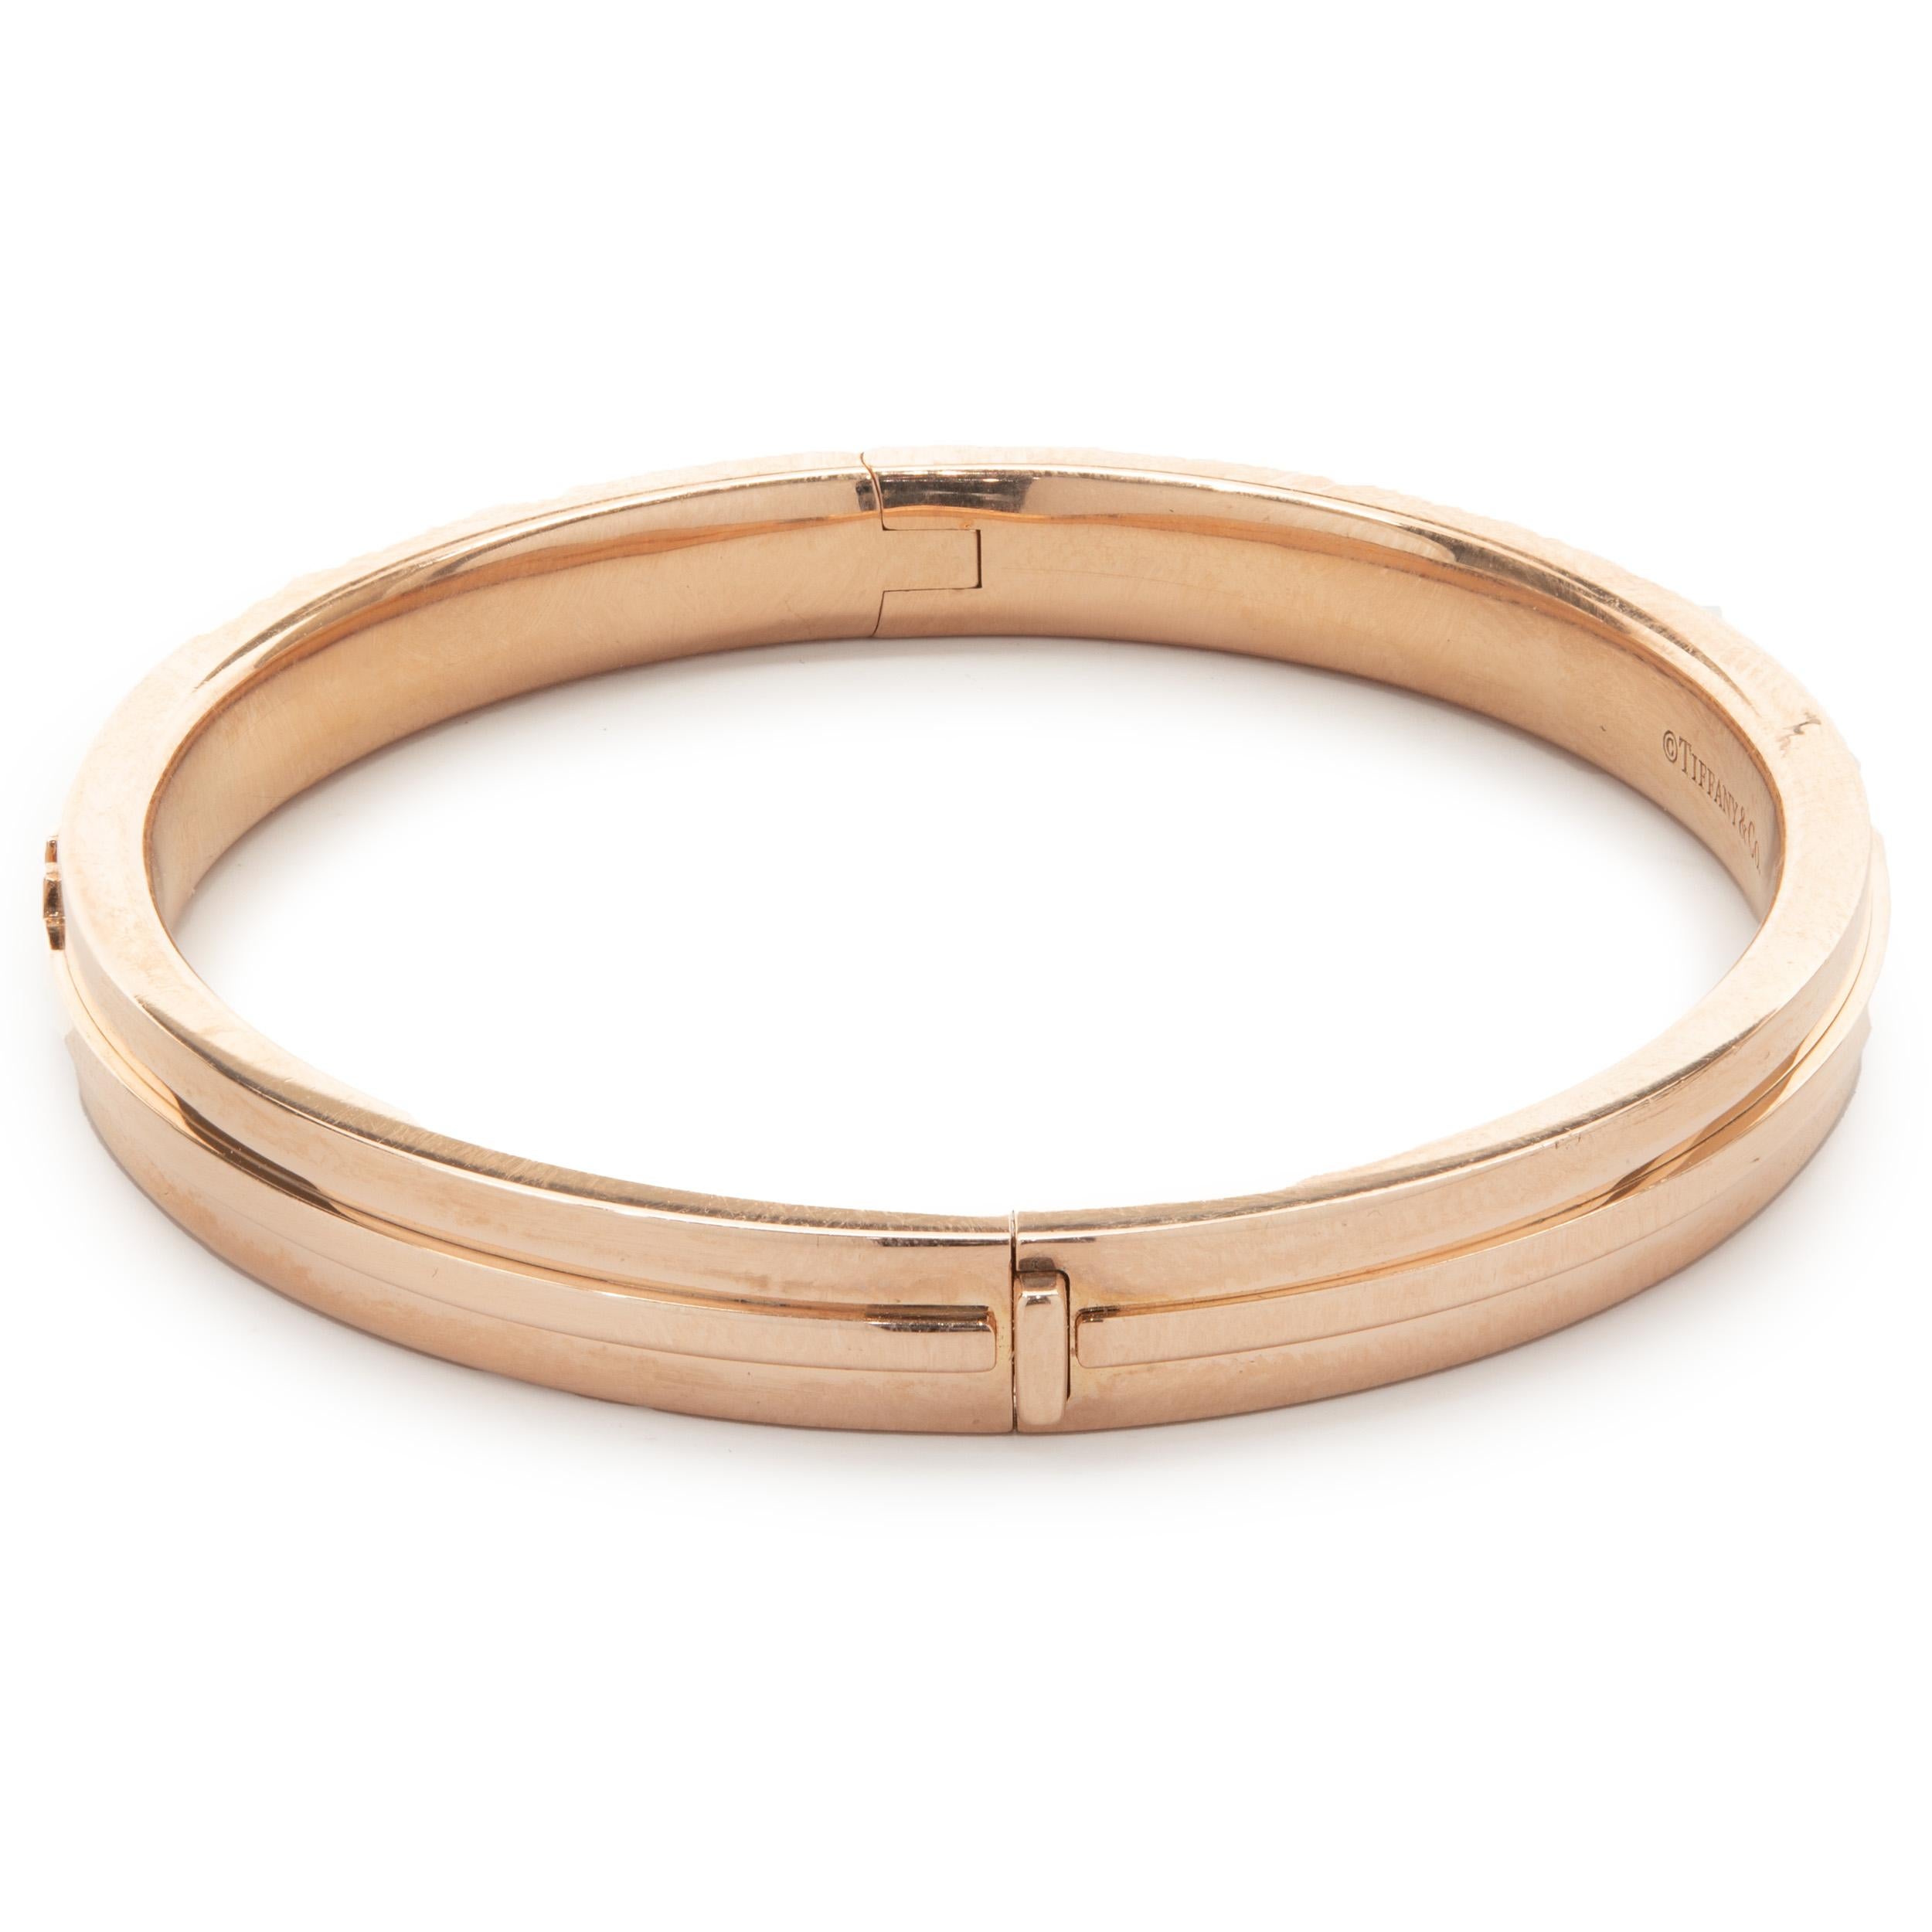 Designer: Tiffany & Co. 
Material: 18K rose gold
Dimensions: bracelet will fit a 6-inch wrist
Weight: 33.73 grams